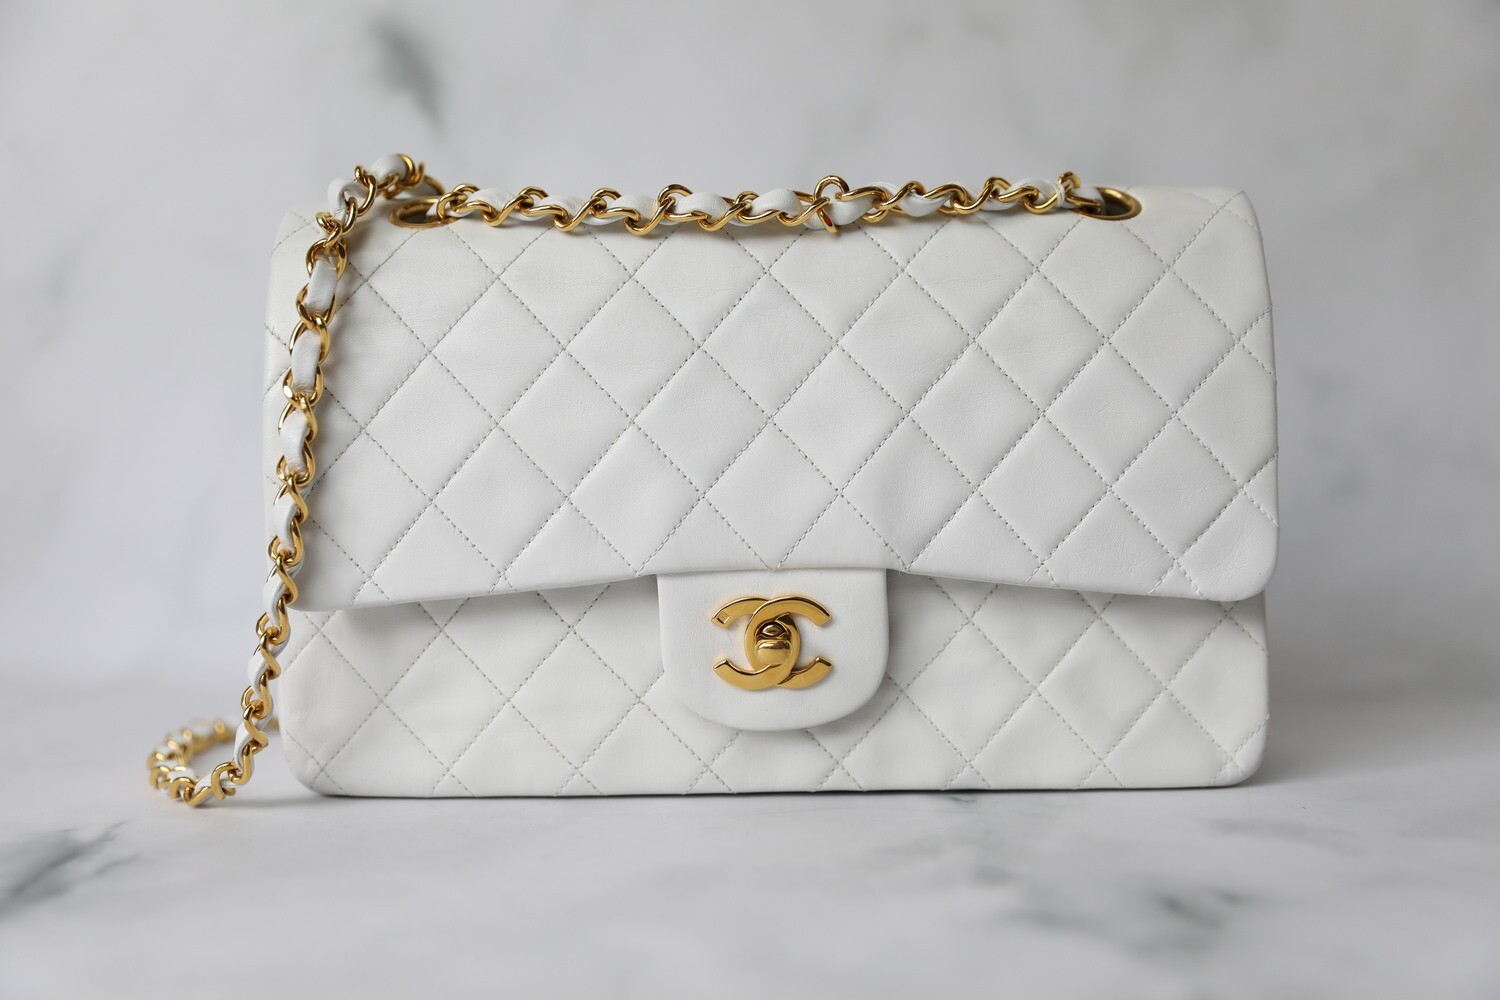 Chanel Vintage Medium, White Lambskin with Gold Hardware, Preowned